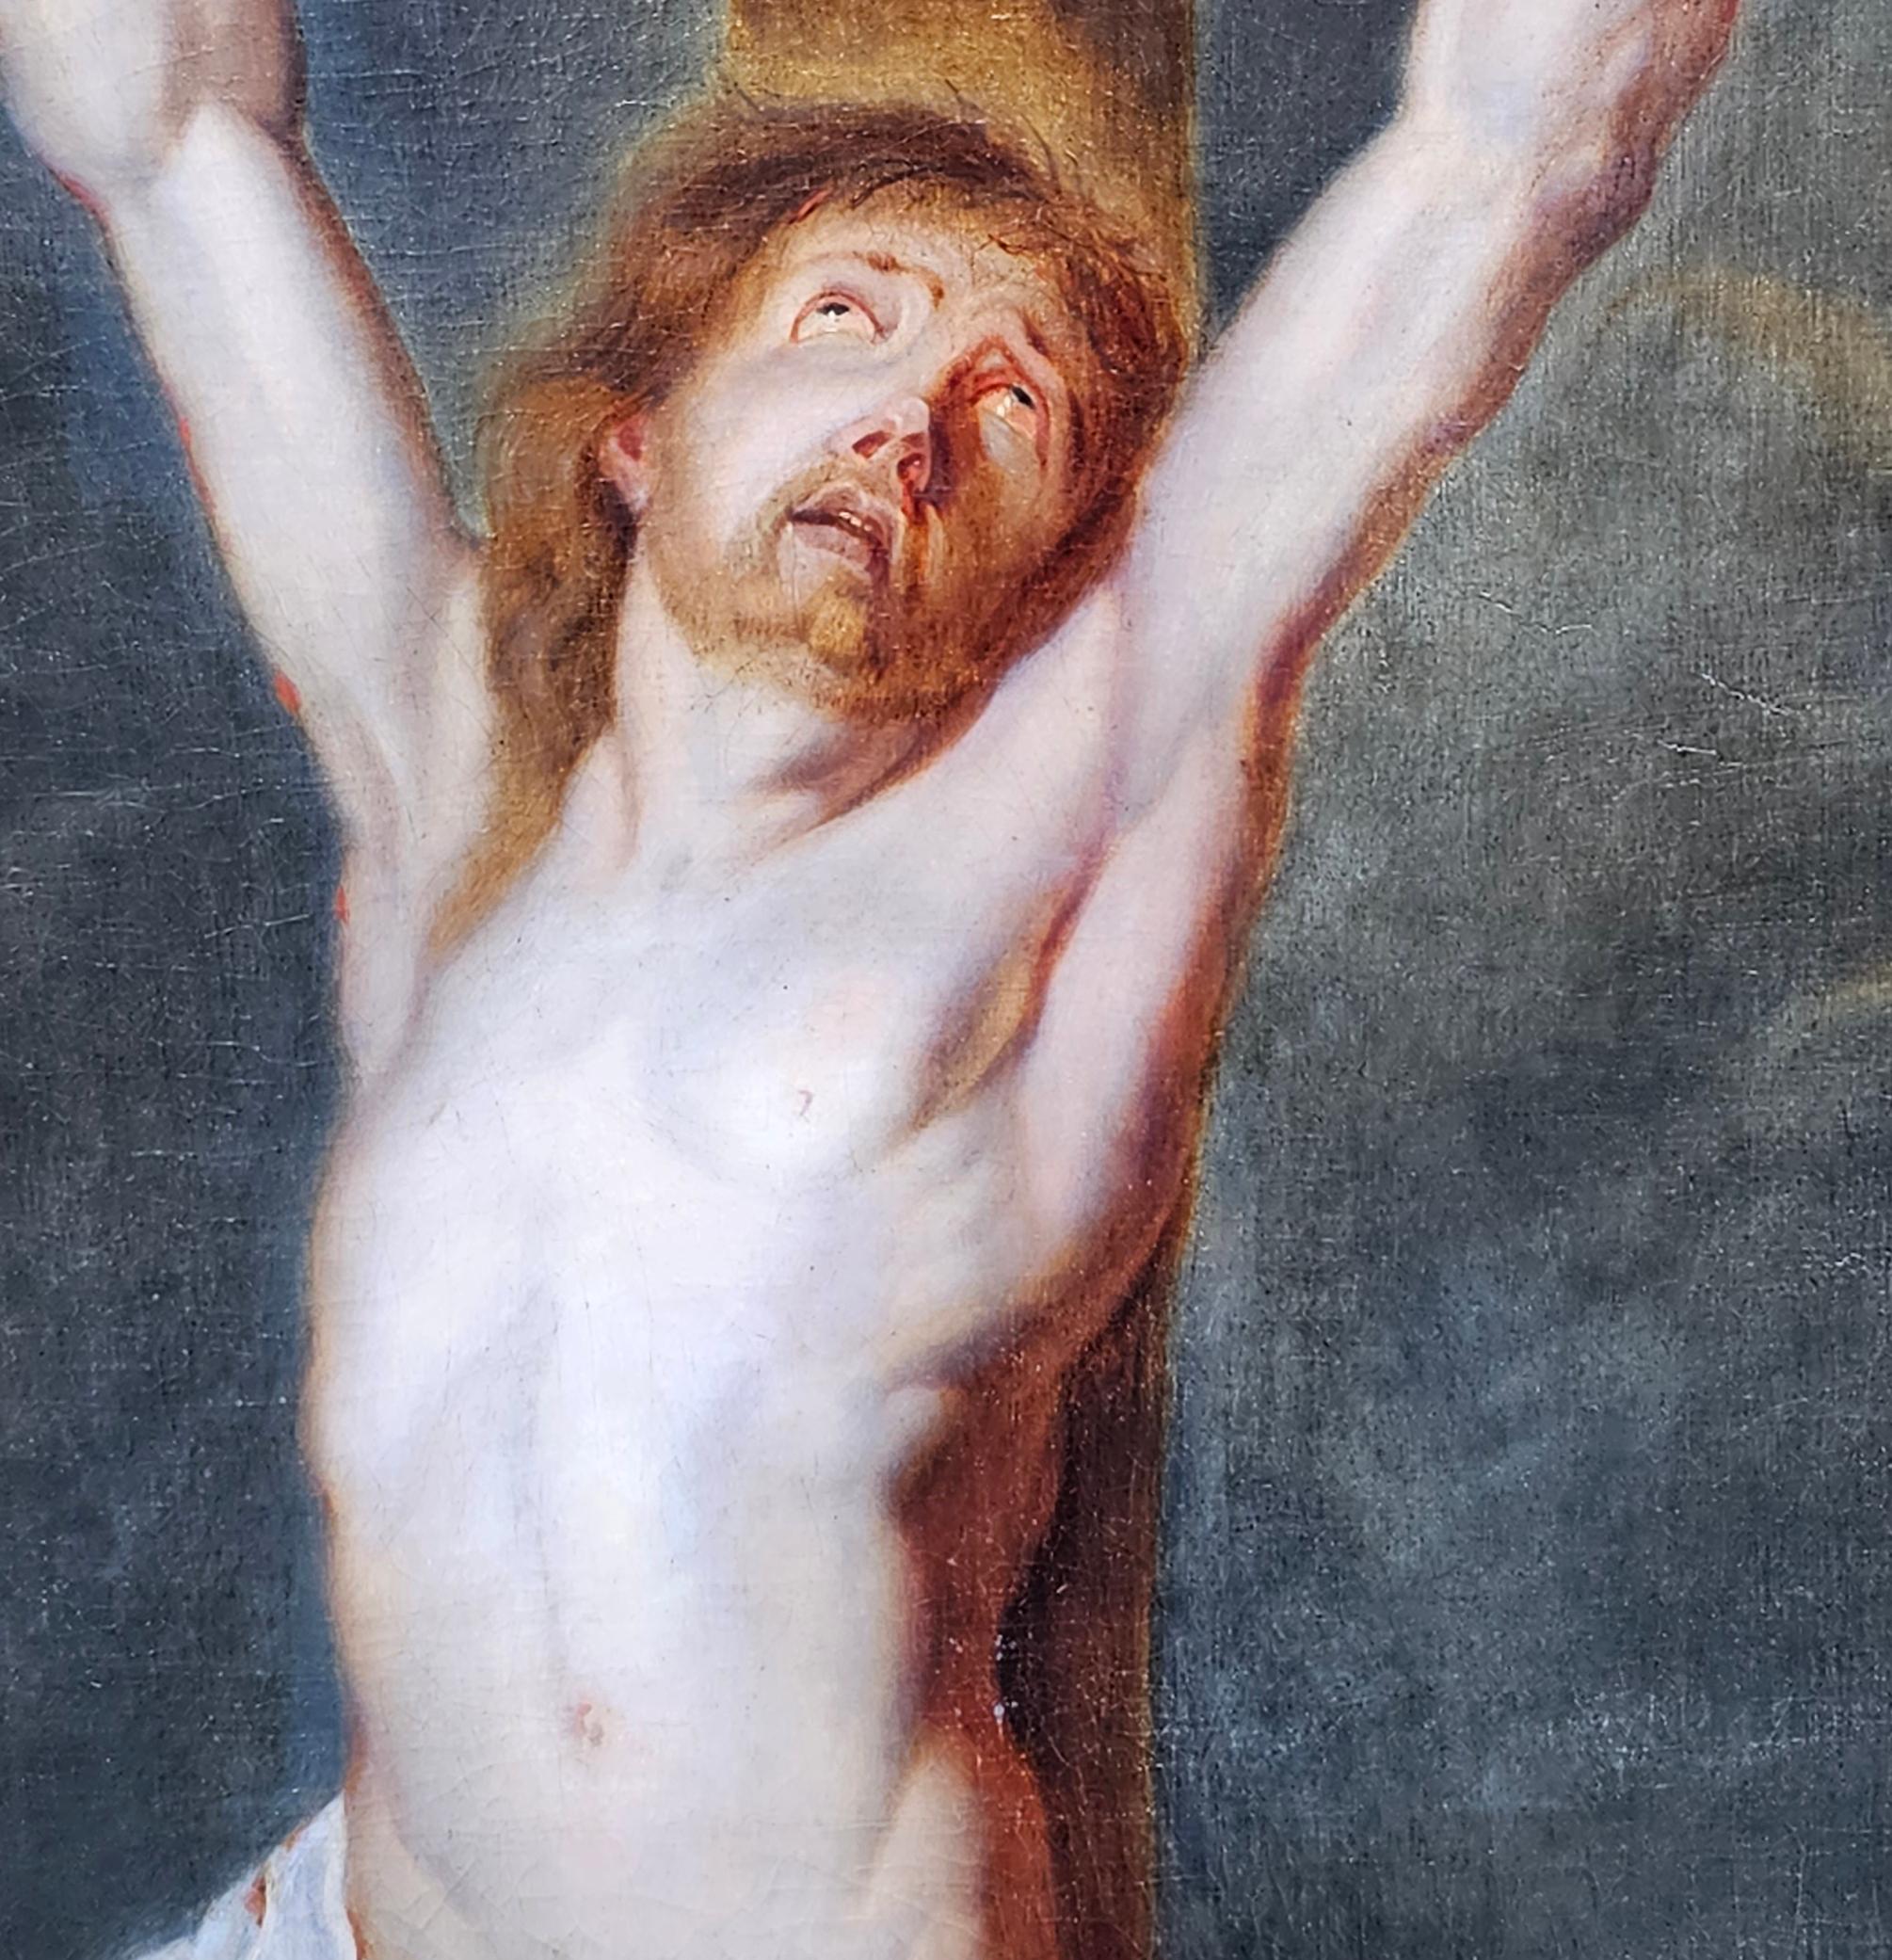 The Crucifixion - Flemish 18th century religious Old Master art oil painting - Old Masters Painting by Anthony Van Dyck